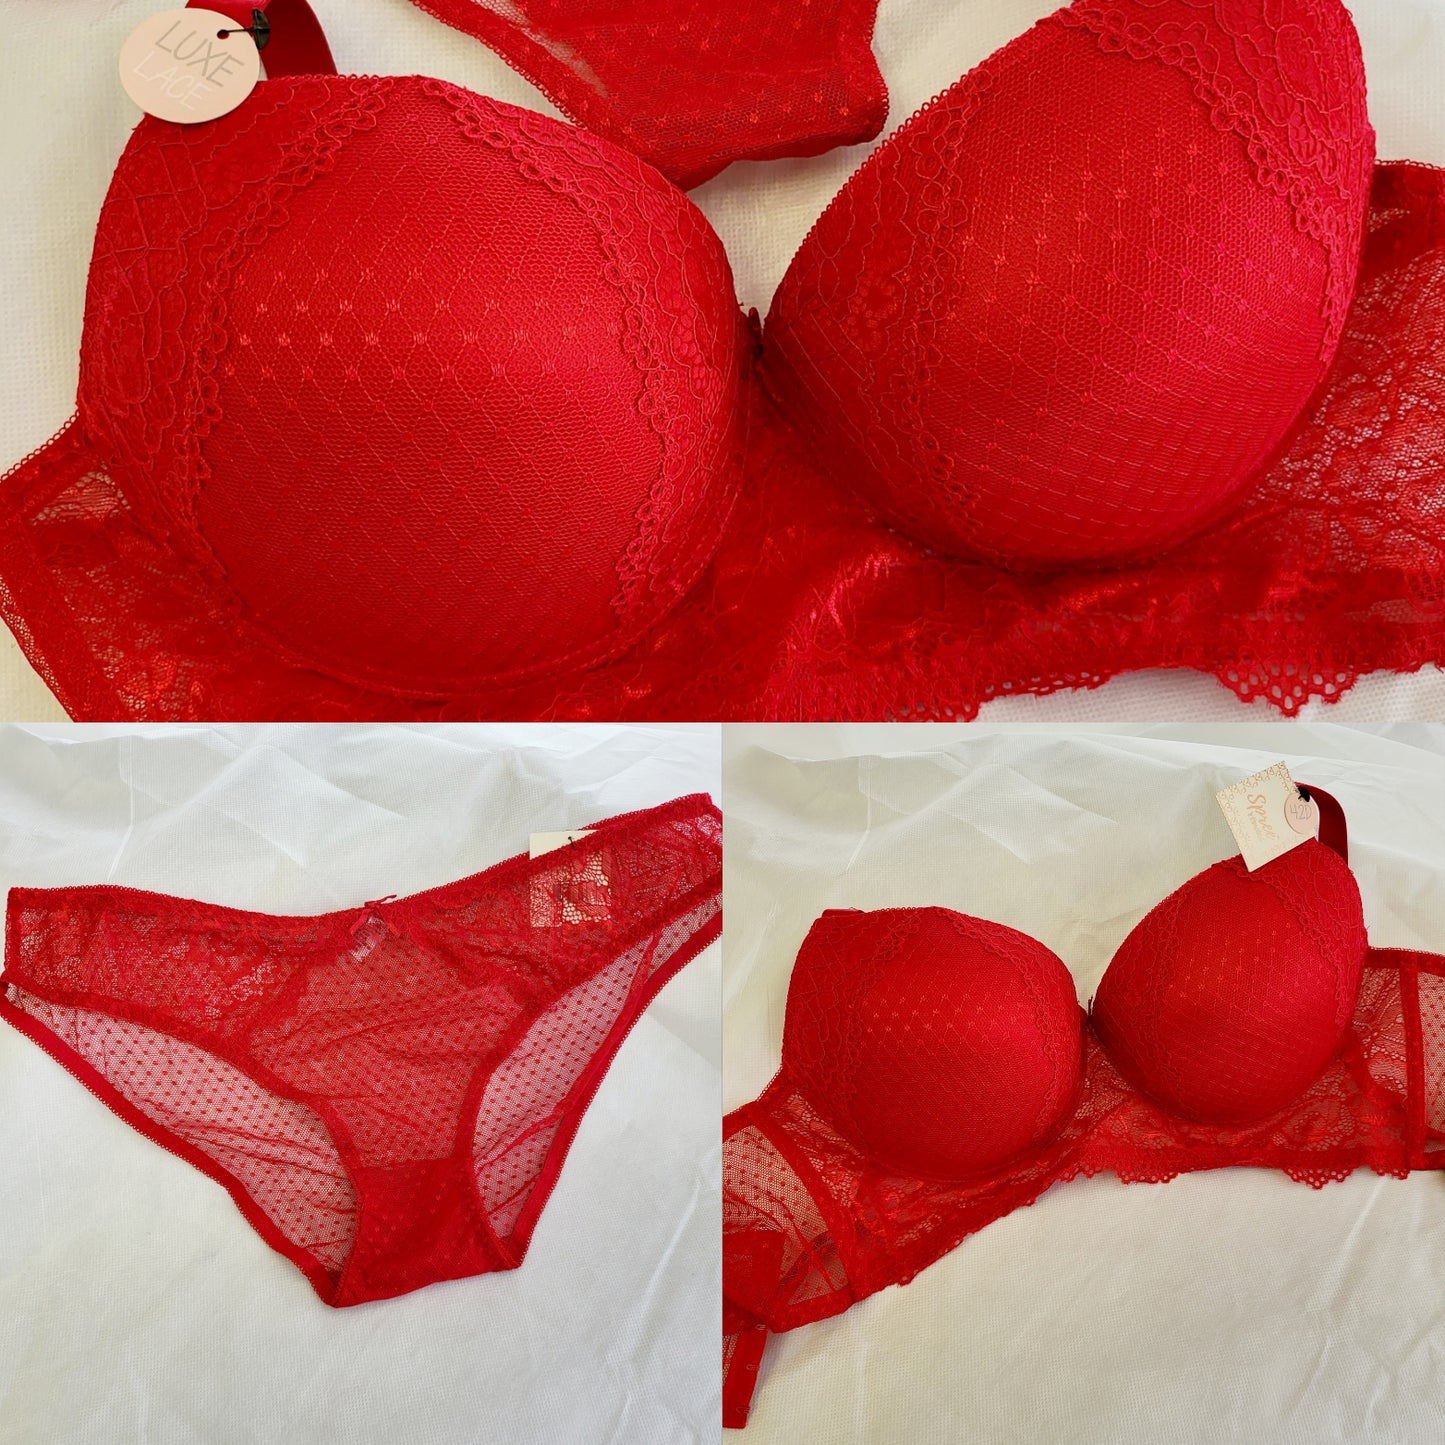 Trendy Red Lace Bra/Thong Set Curvy Queen Size